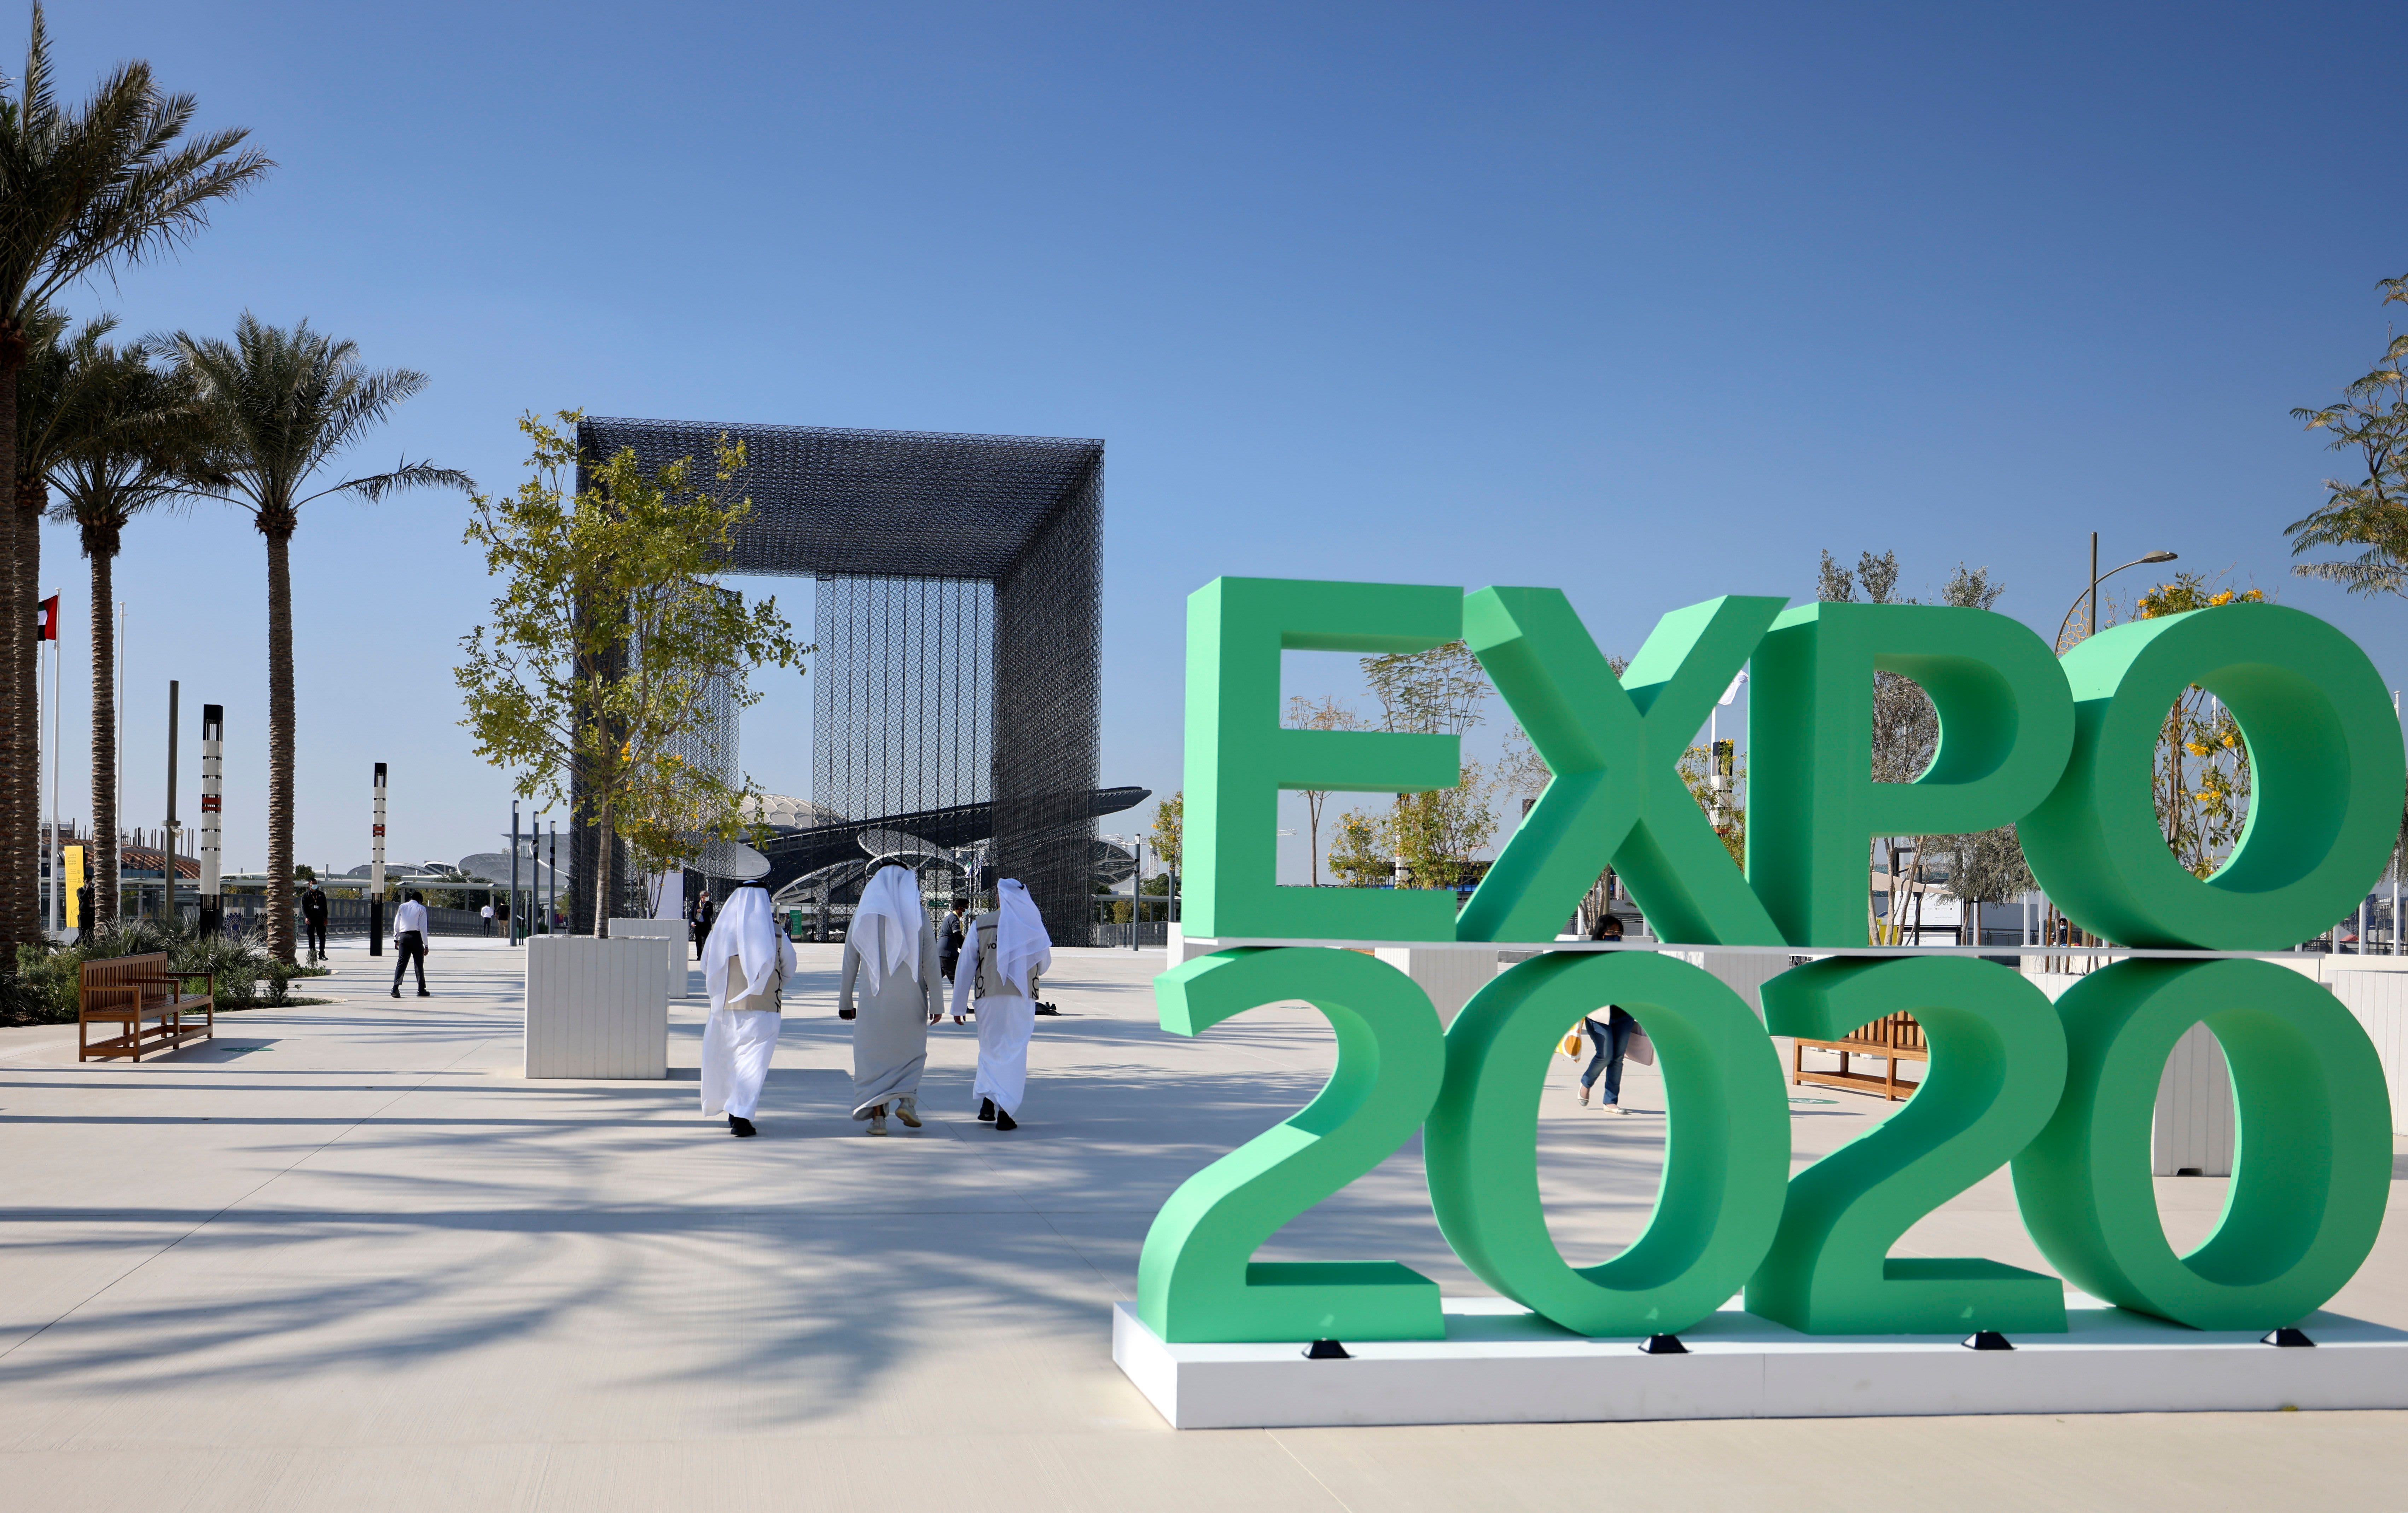 Rogue variants and virus “vortex” put the planners of Expo Dubai in a state of tension